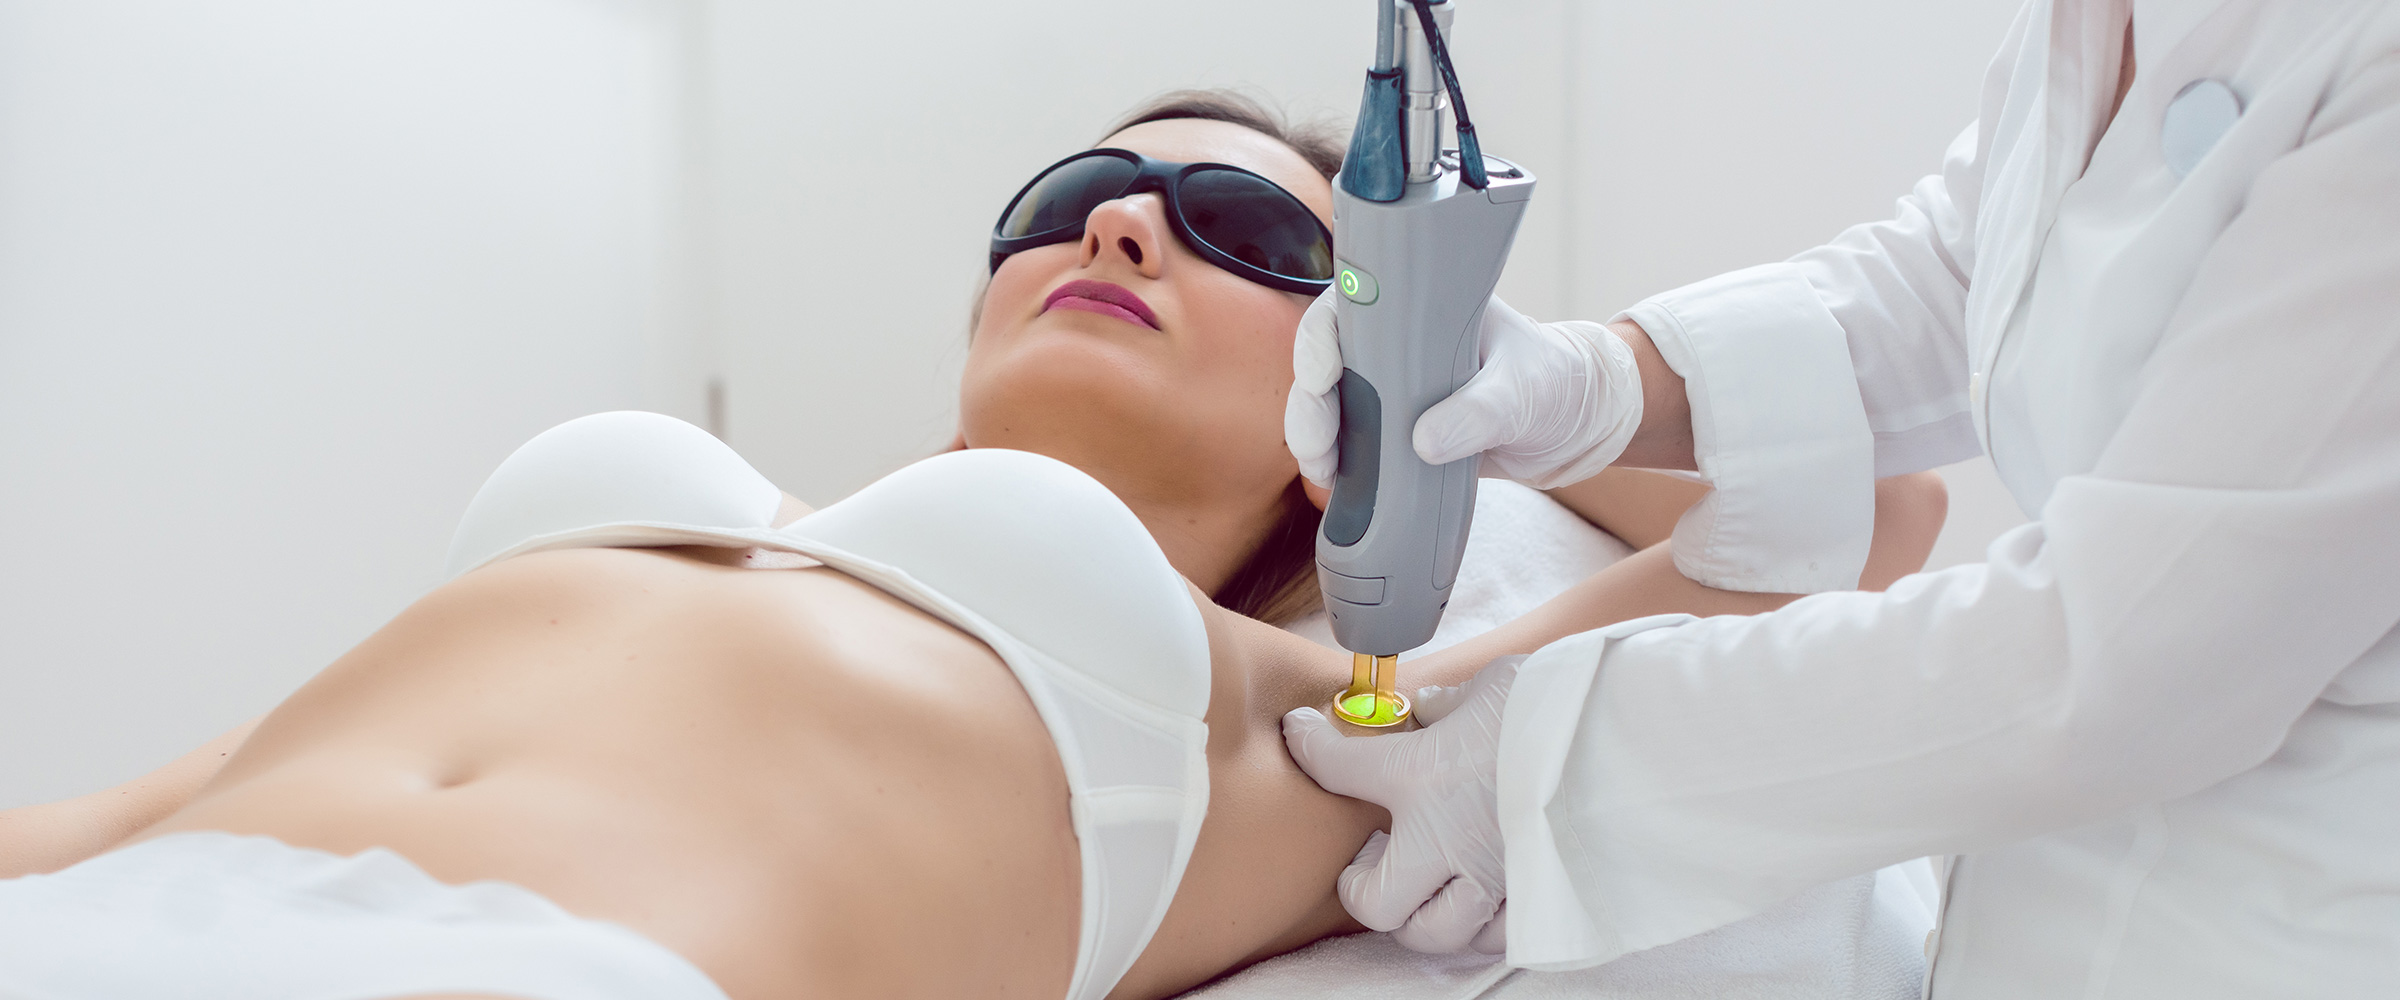 Laser Hair Removal - Permanent Solution For Men & Women - See Prices